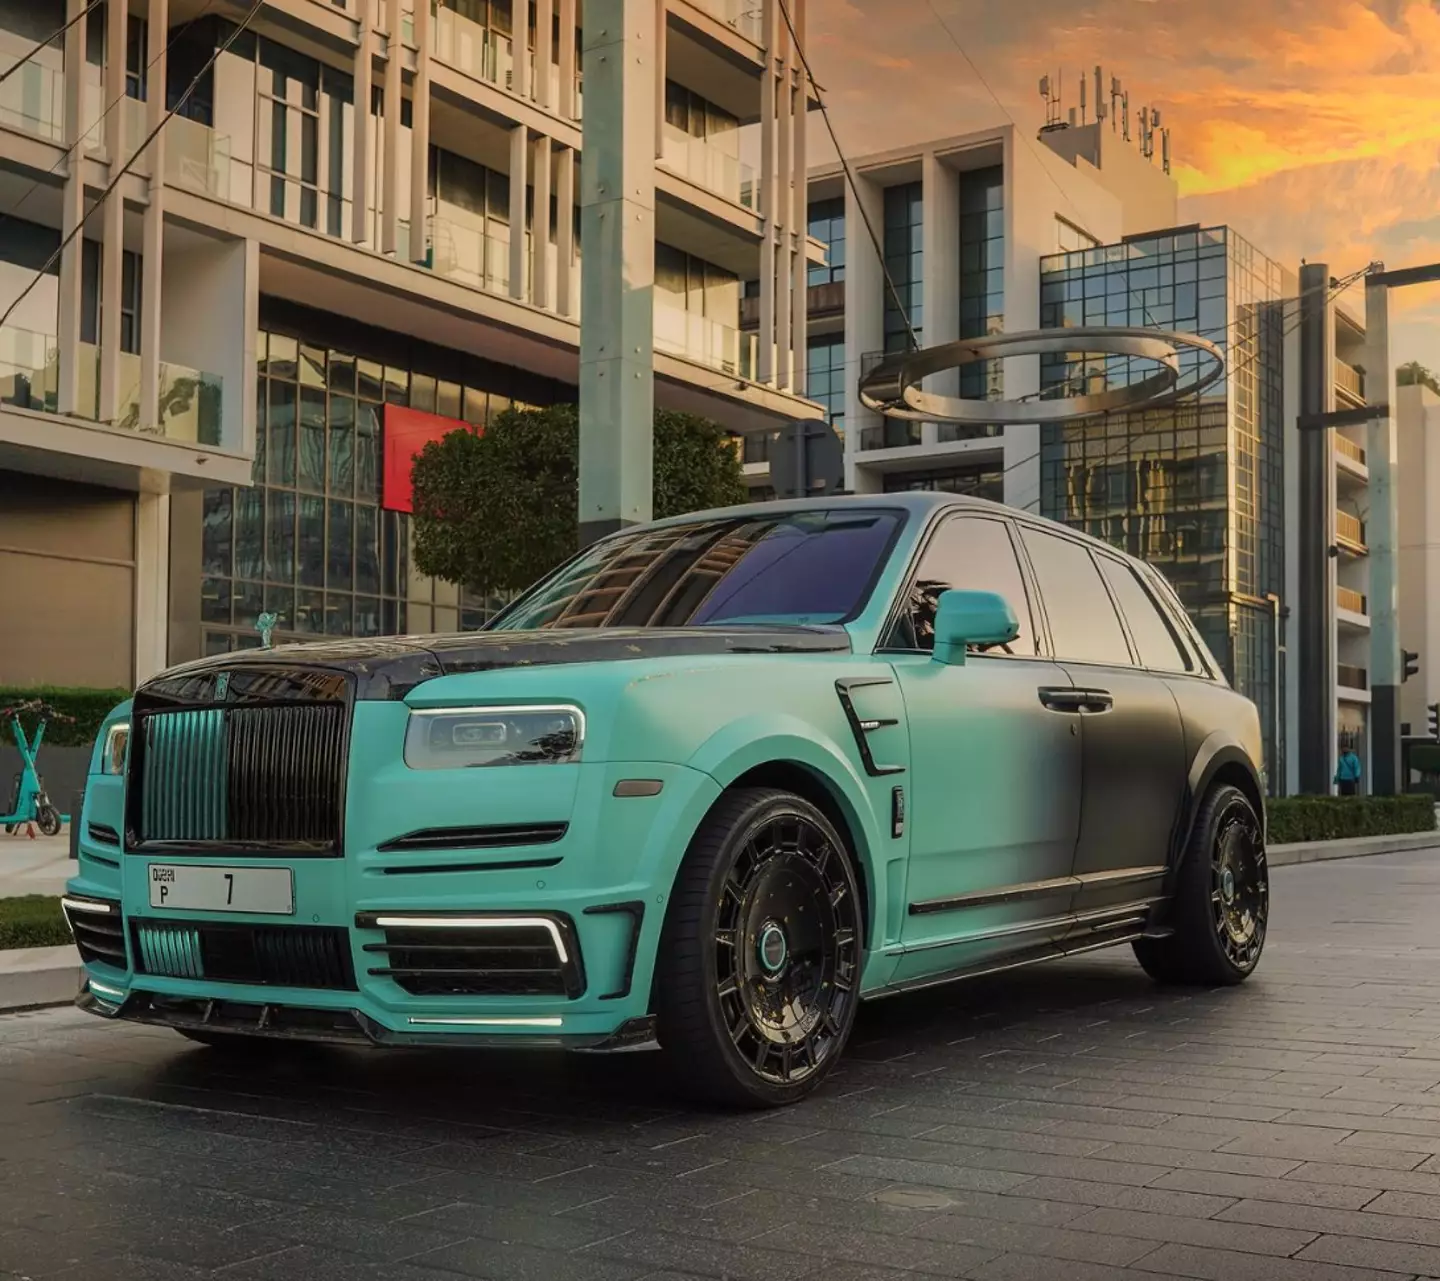 The Mansory Rolls-Royce Cullinan in all its glory.